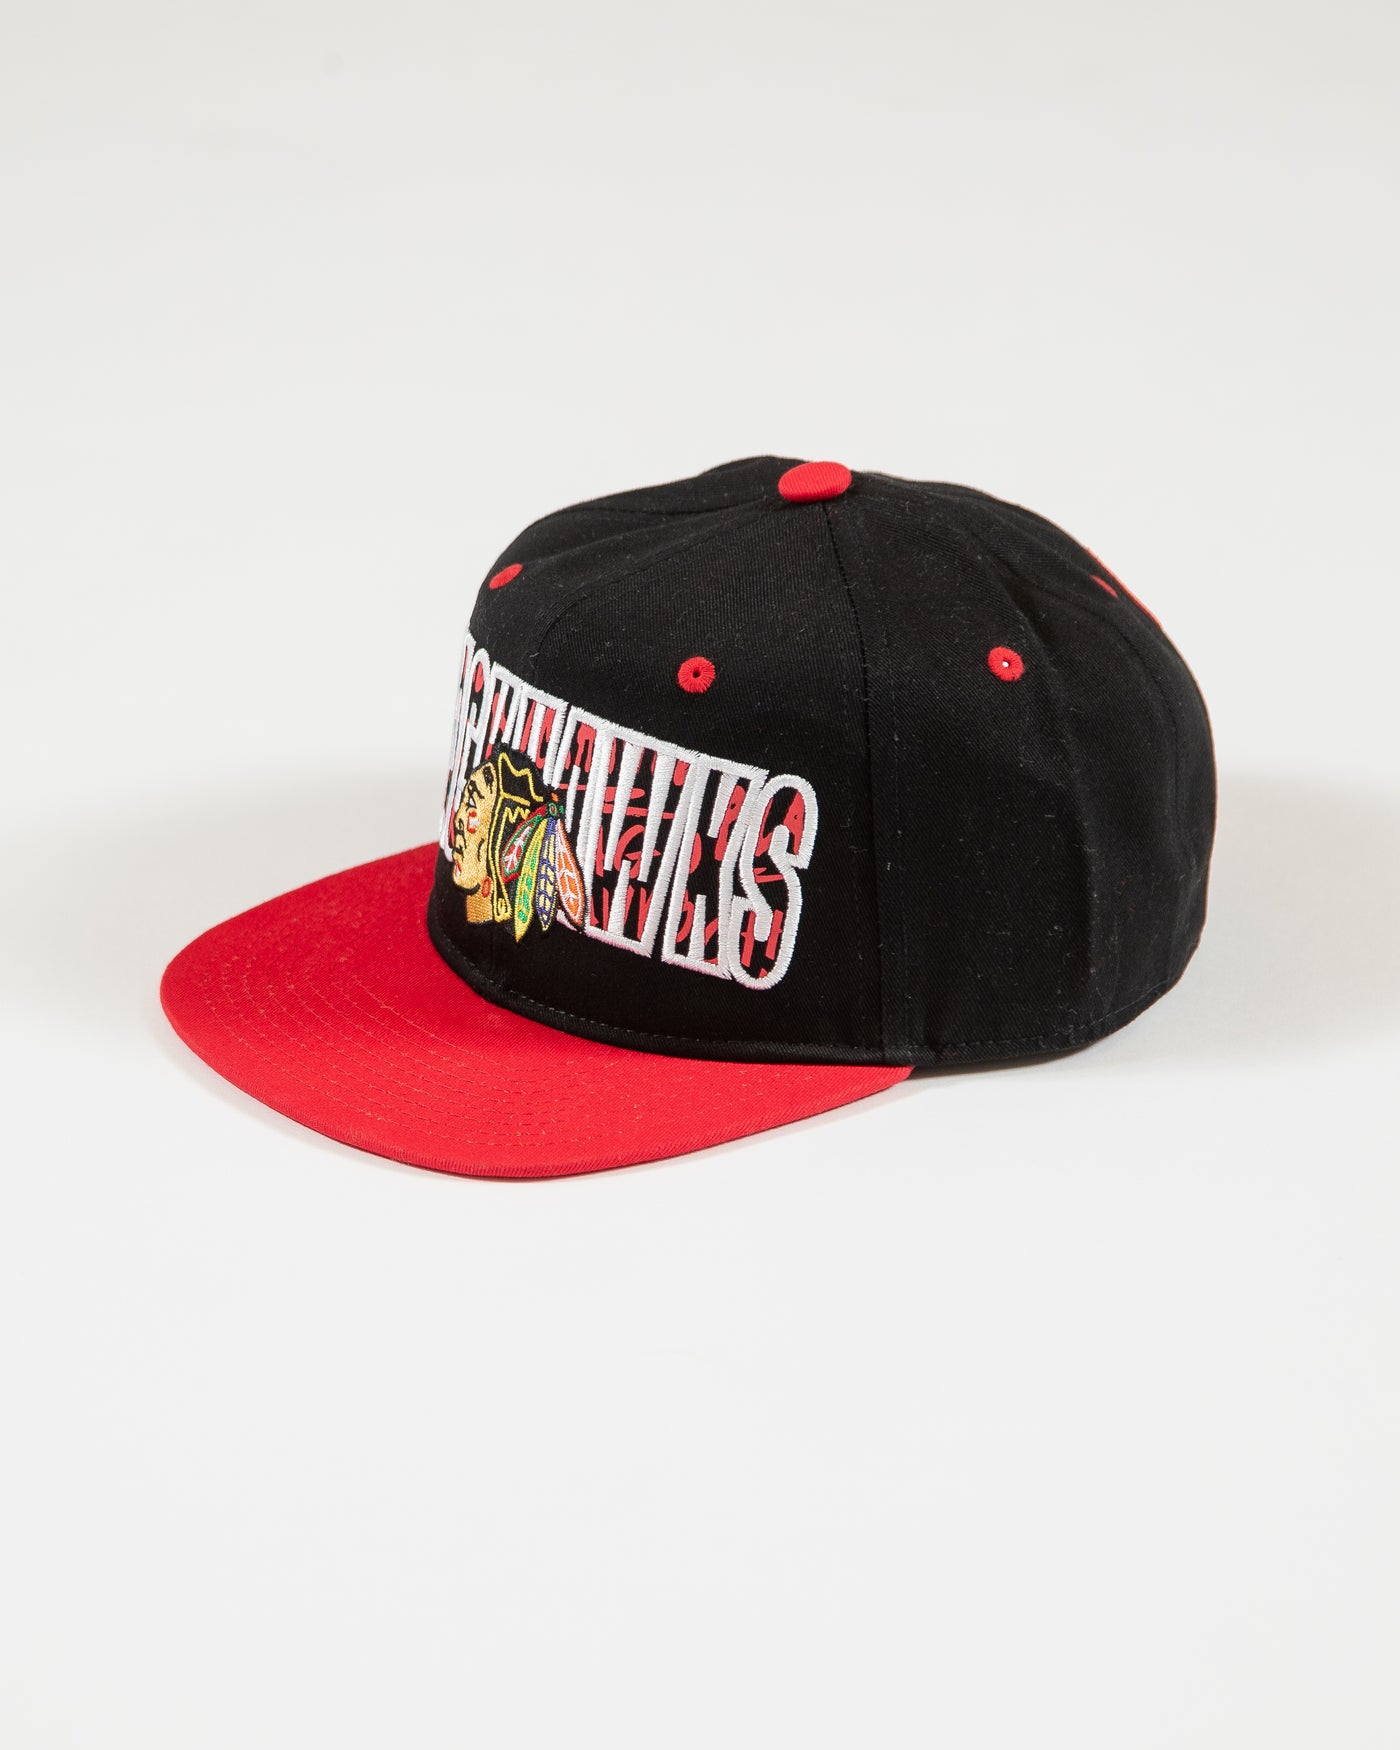 Outerstuff black and red youth snapback with flat brim with Chicago Blackhawks wordmark and primary logo with graffiti inspired design - left angle lay flat